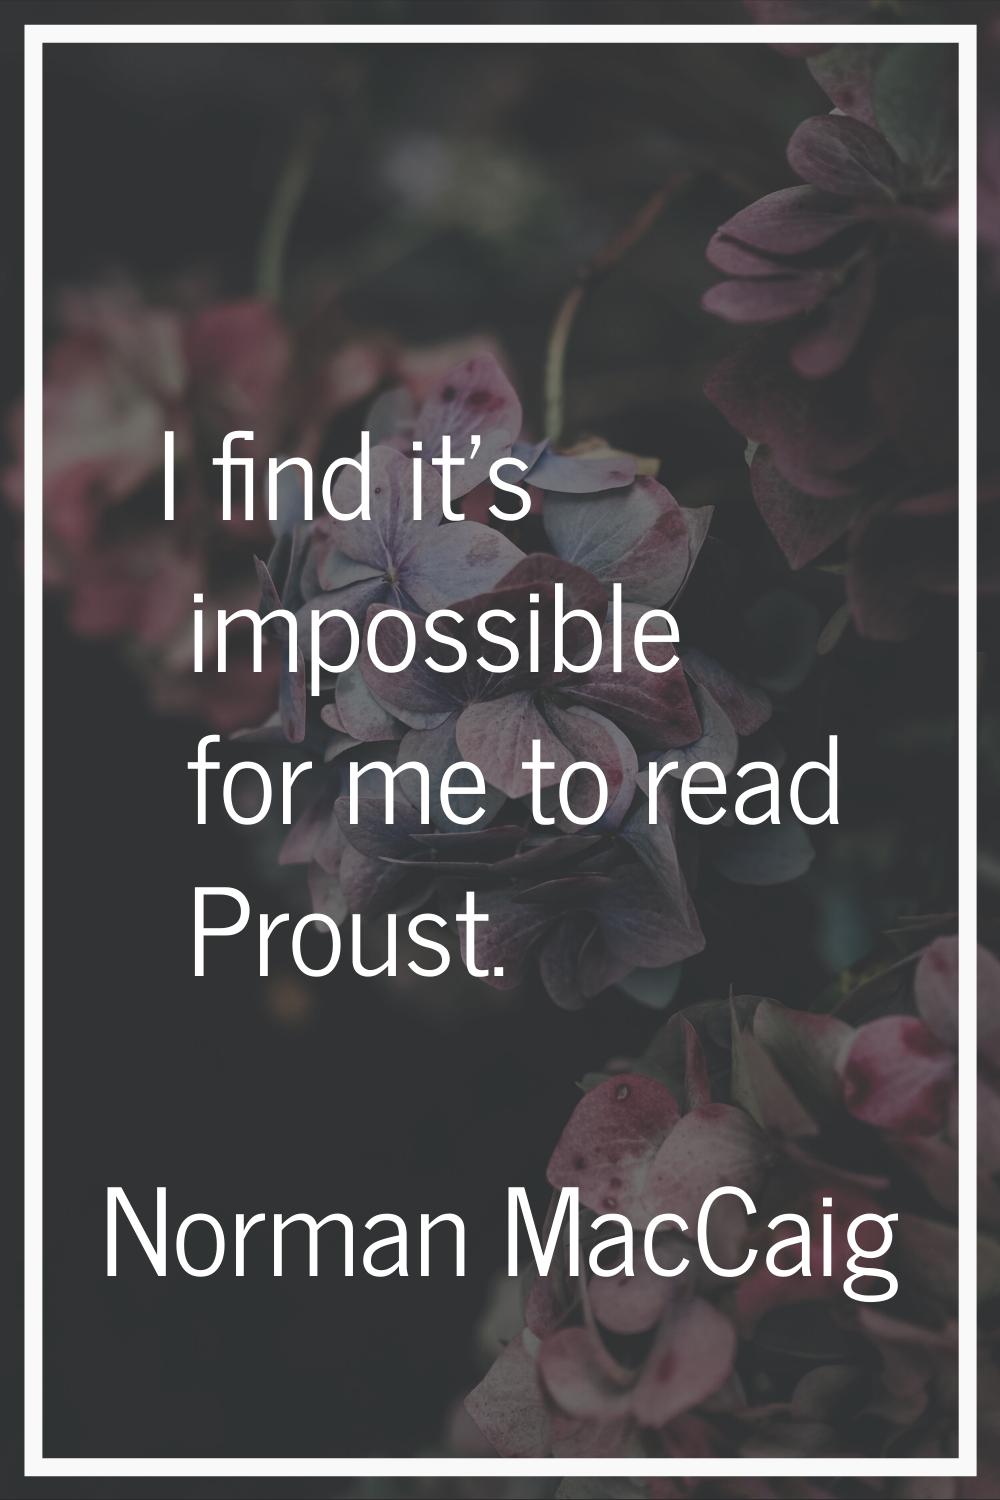 I find it's impossible for me to read Proust.